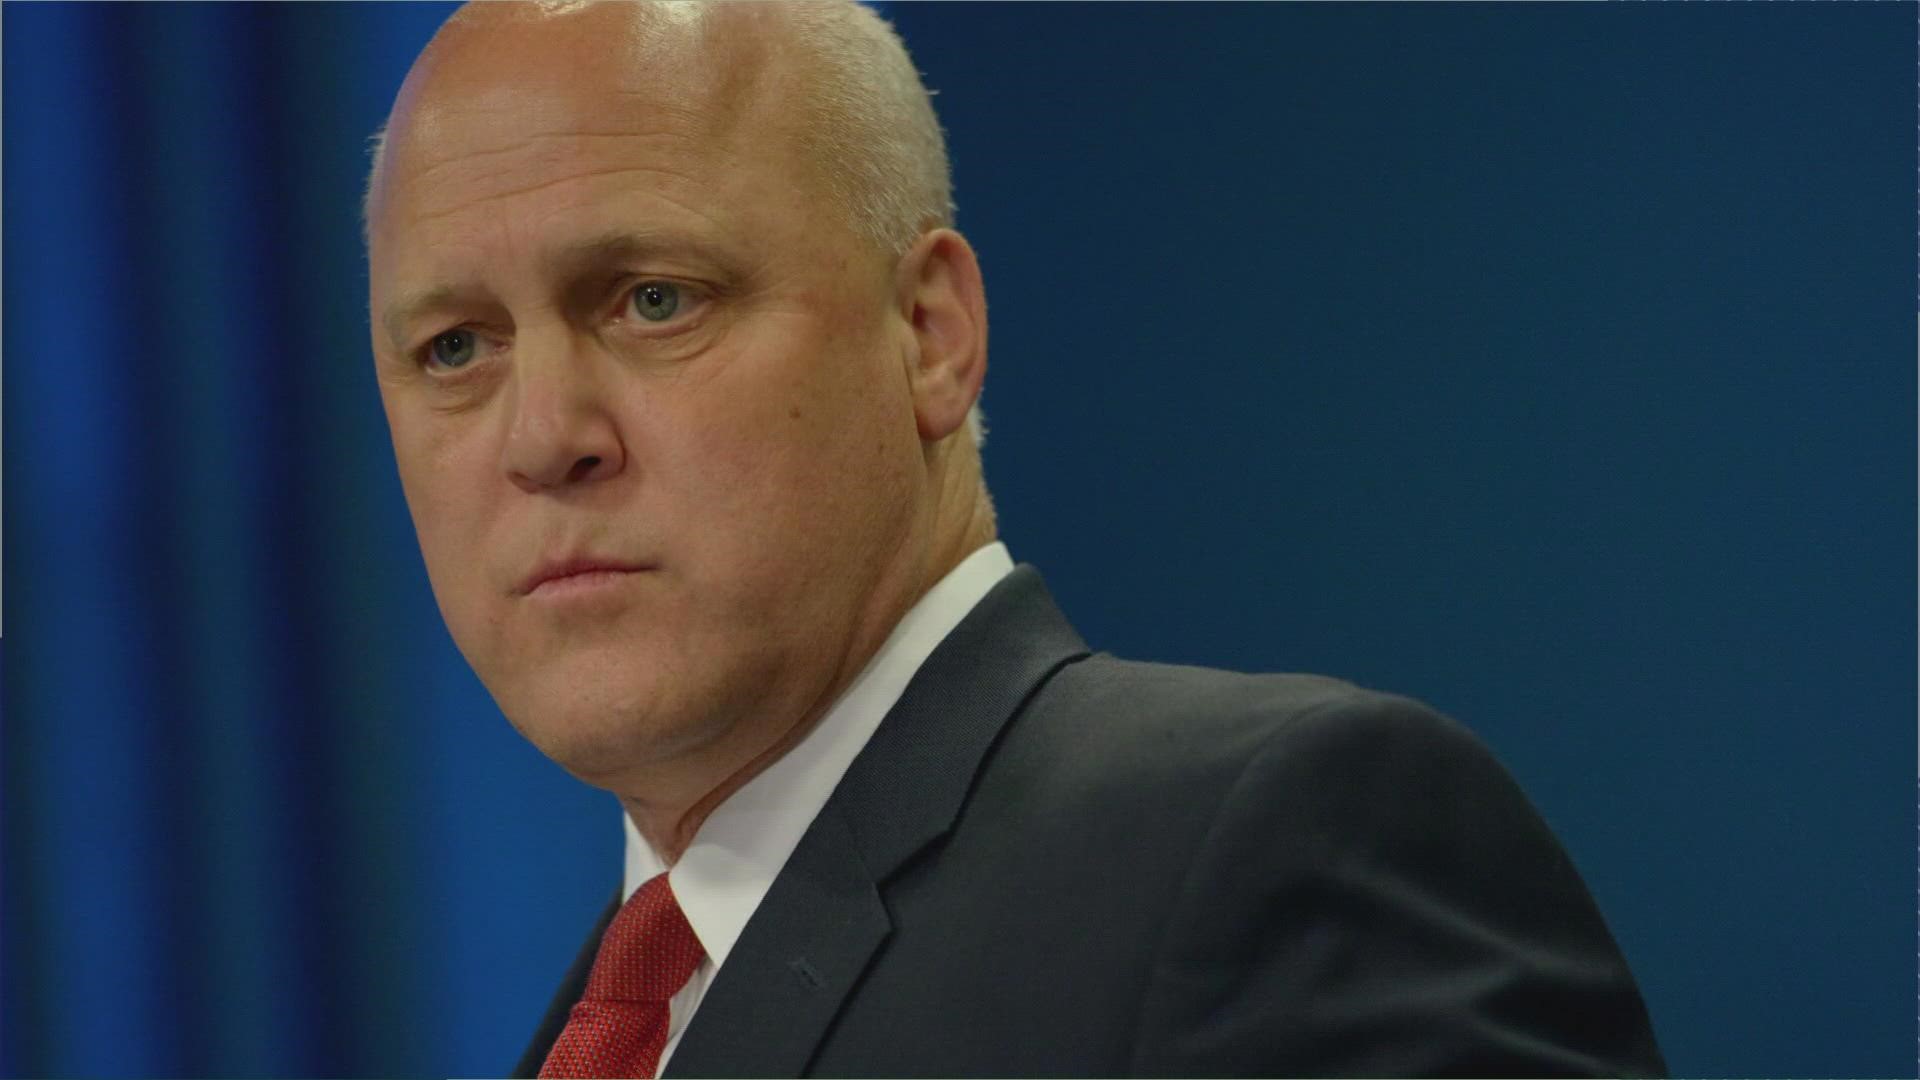 President Biden has picked former N.O. mayor Mitch Landrieu to be in charge of the $1 trillion infrastructure plan.